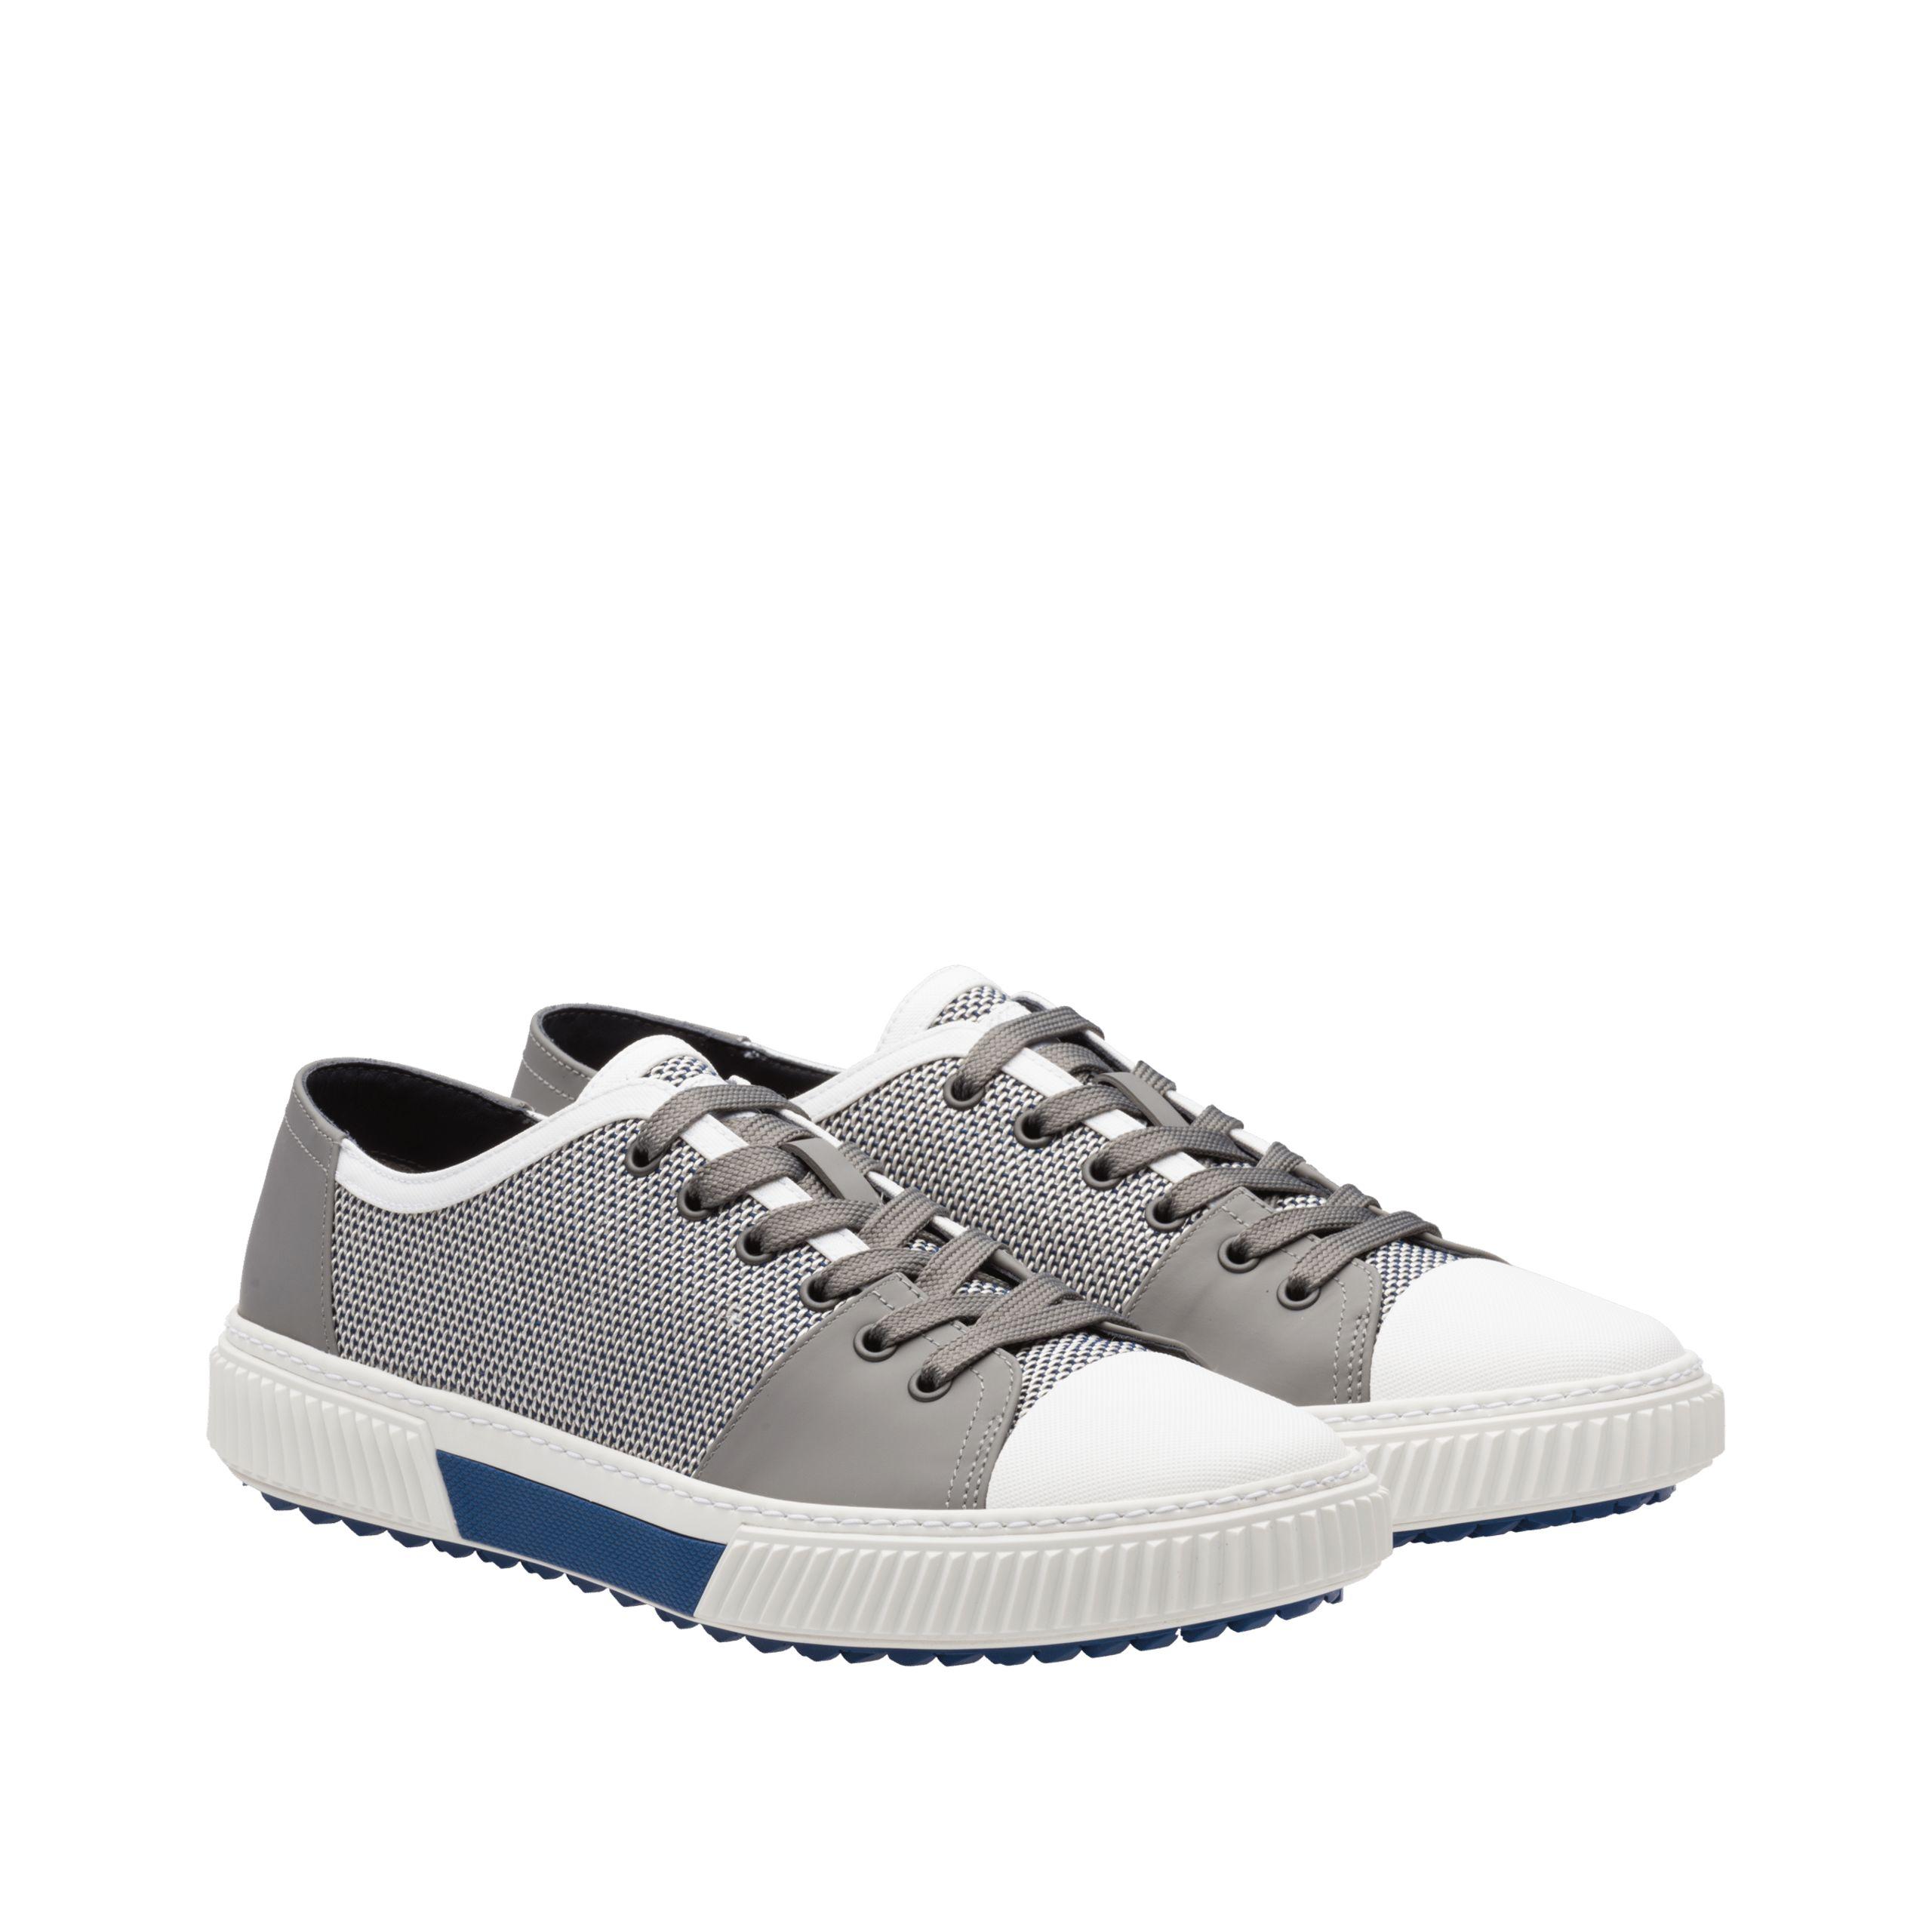 Prada Technical Mesh And Leather Sneakers for Men - Lyst